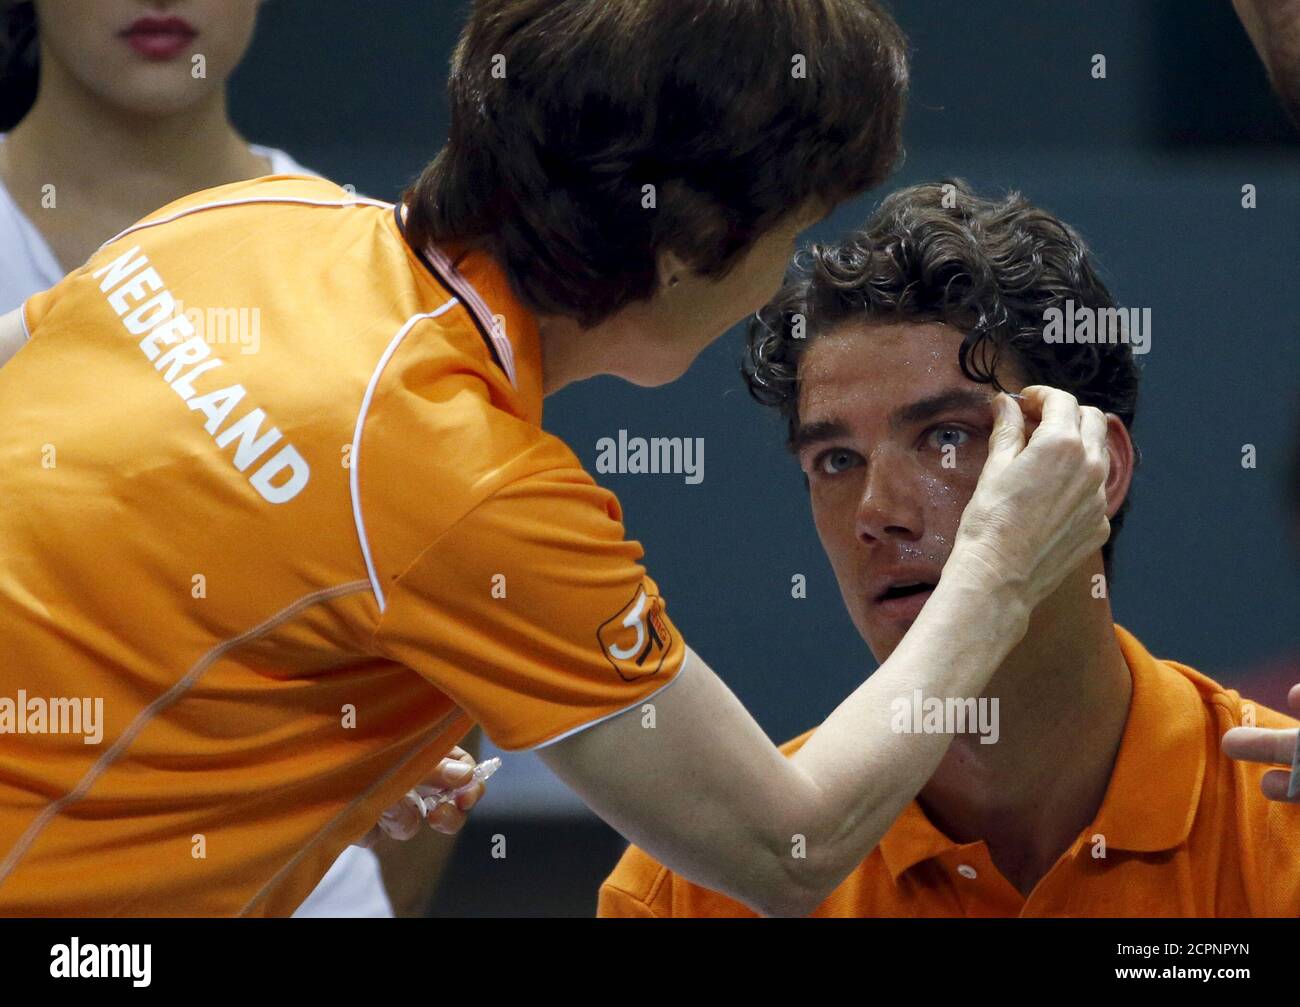 Jesse Huta Galung of the Netherlands receives treatment for his eye during  his Davis Cup World Group play-off tennis match against Switzerland's Roger  Federer at the Palexpo Arena in Geneva September 18,